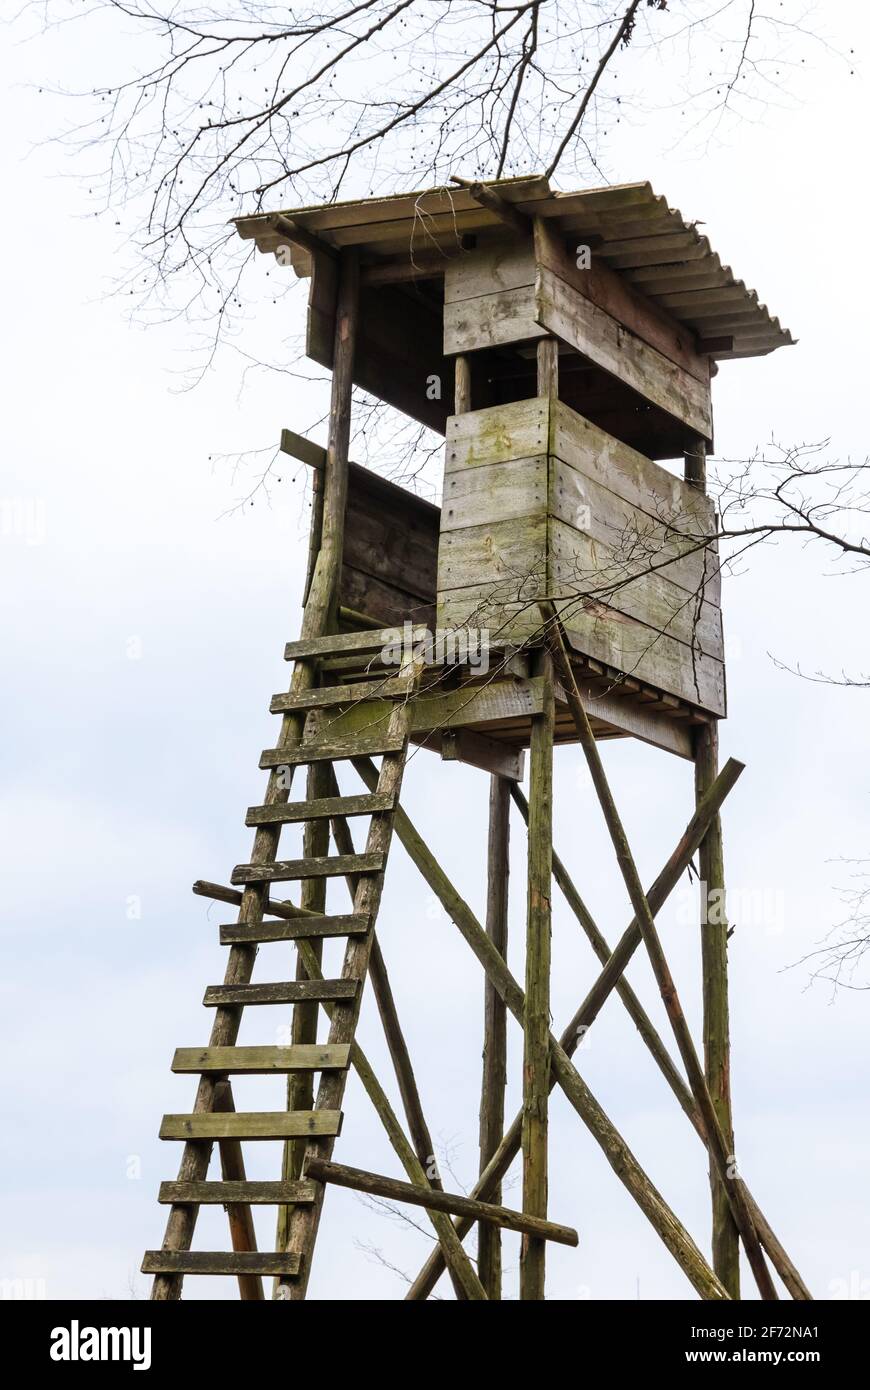 Wooden raised hide with ladder for hunting and observation of wildlife near a forest in Westerwald, Rheinland-Palatinate, Germany, Europe Stock Photo